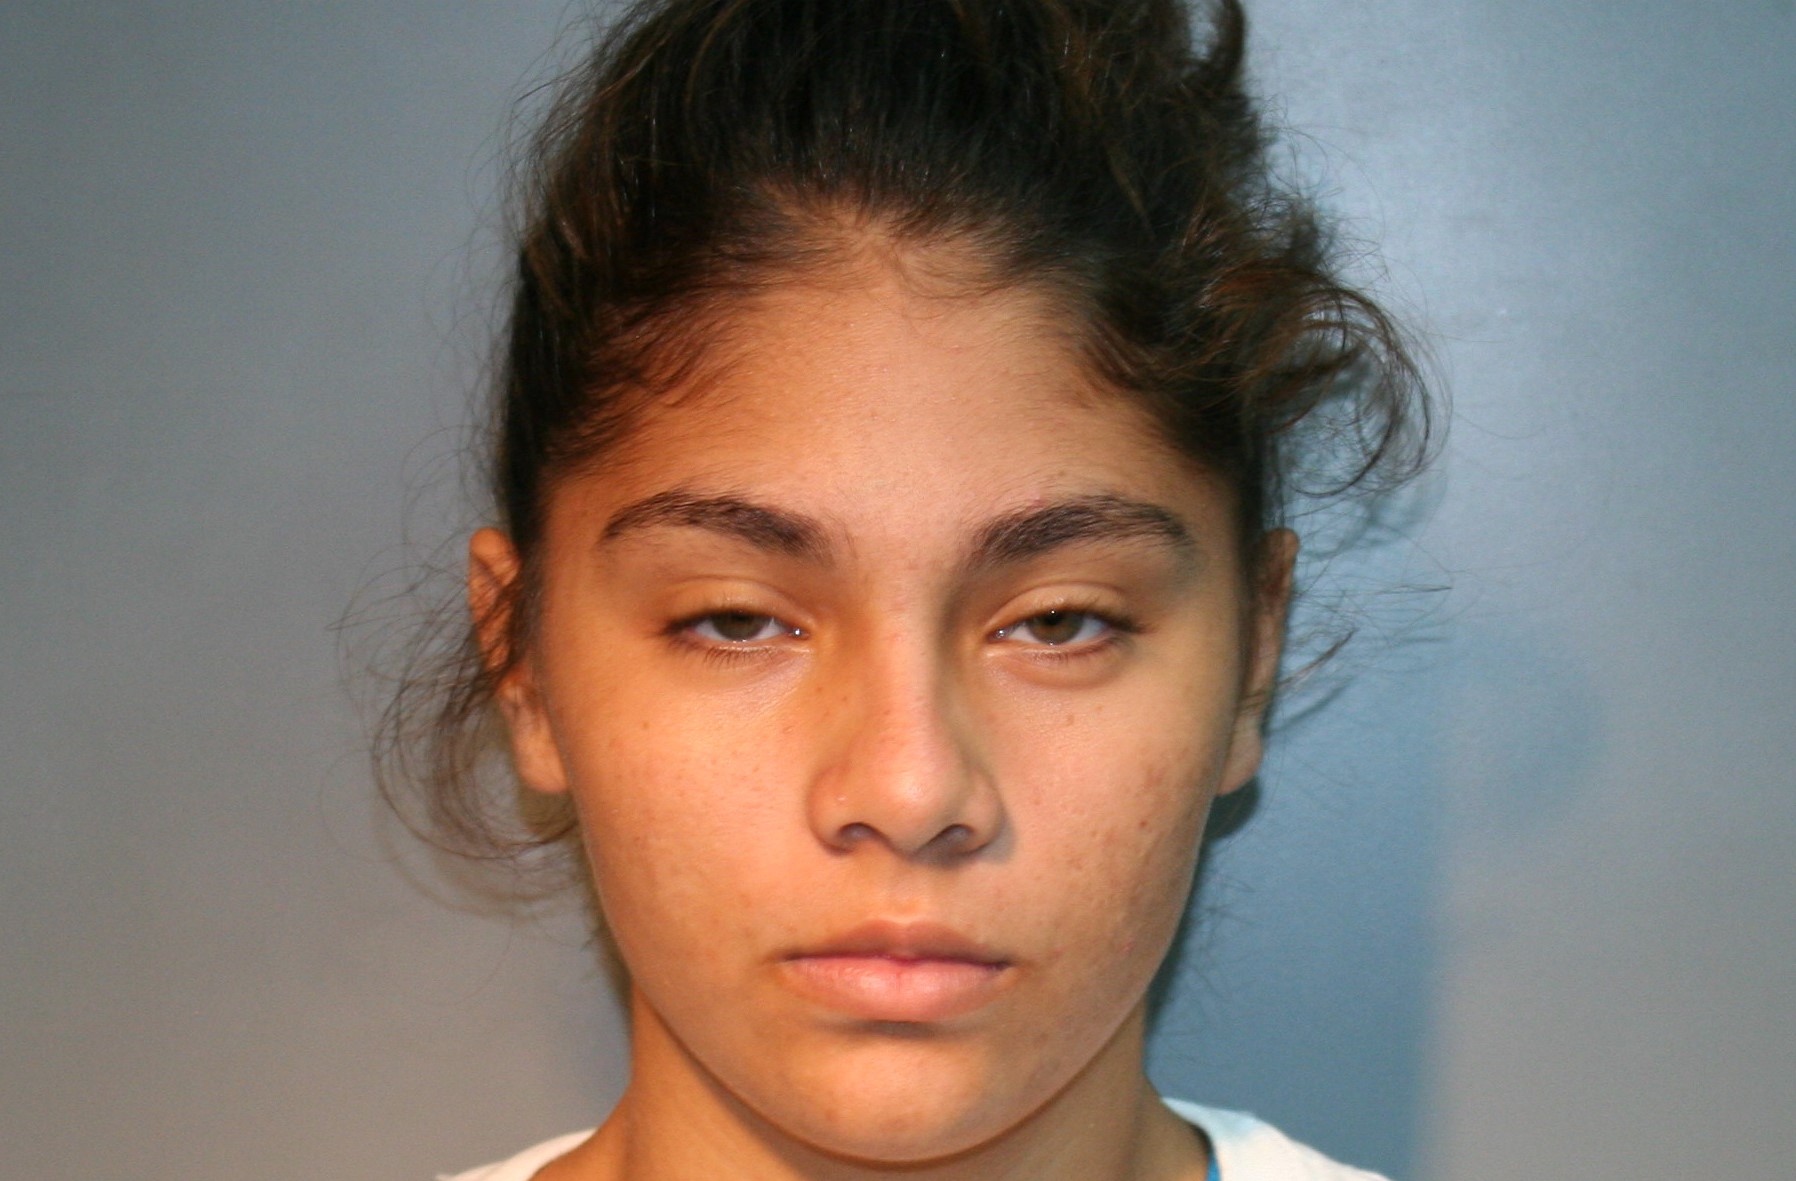 POLICE: VIPD Needs Your Help Now To Locate Missing Girl Lorena Ascencio on St. Croix